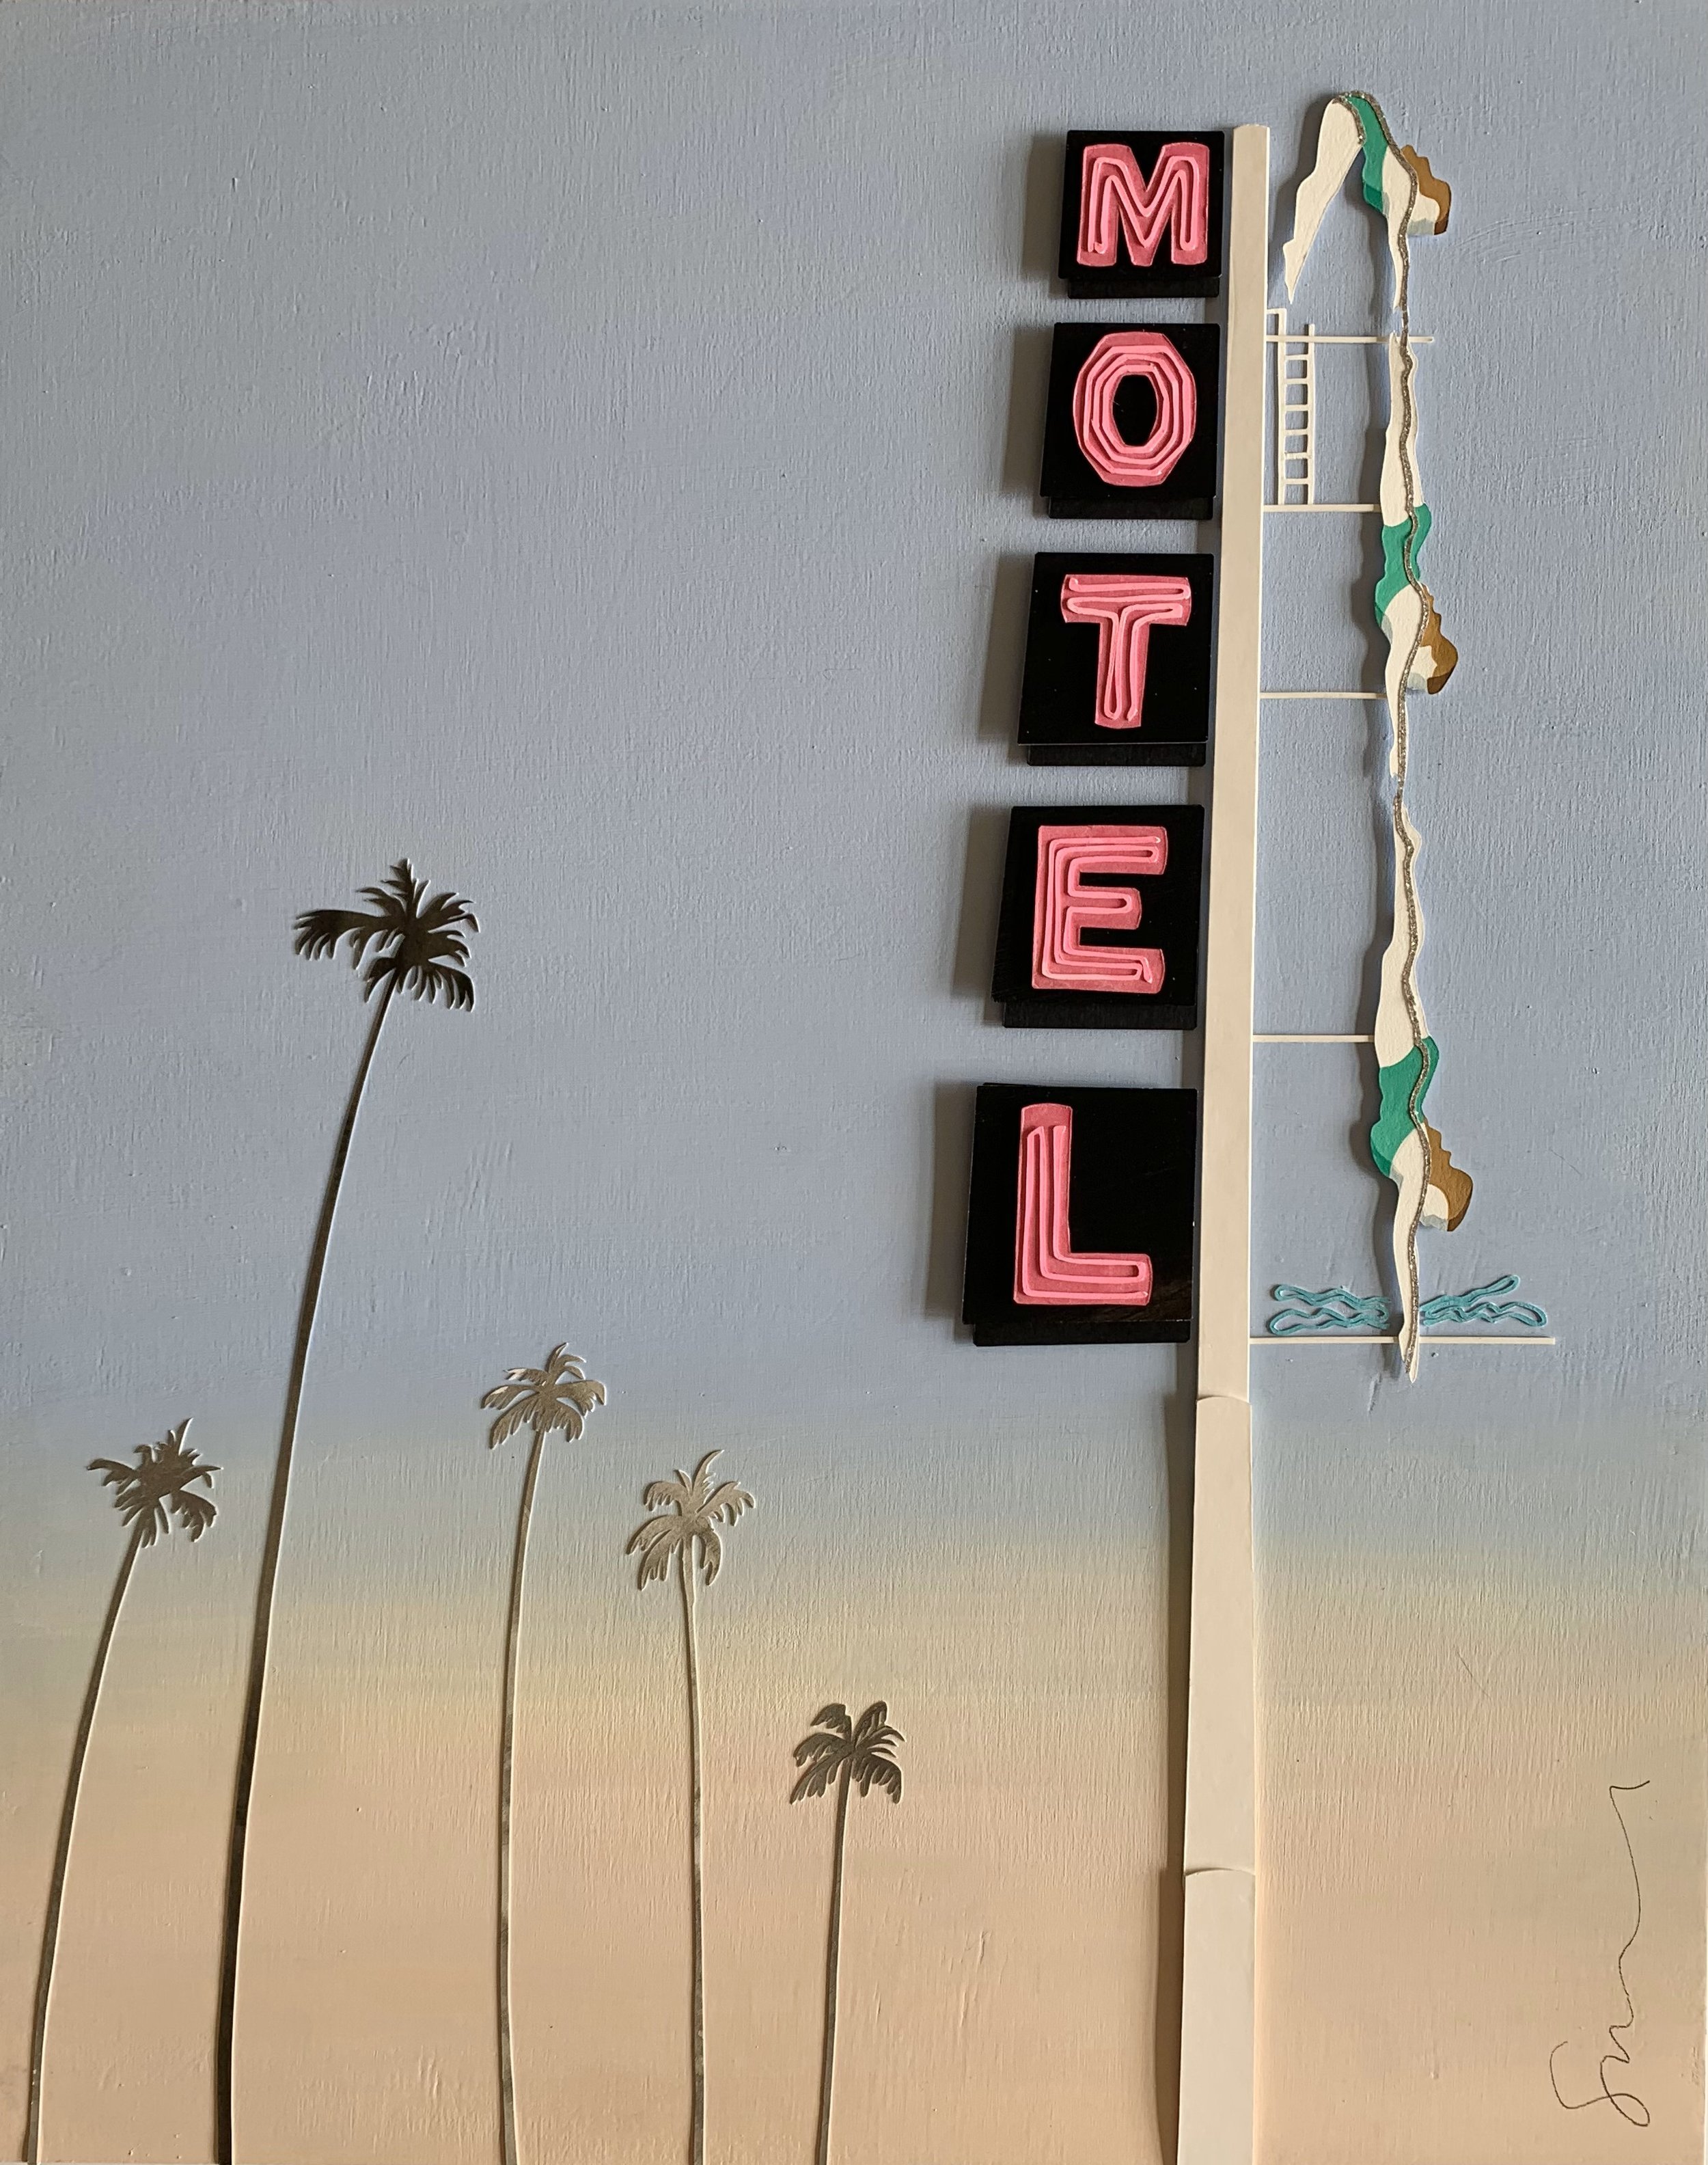 Motel at Sunset by Suze Riley